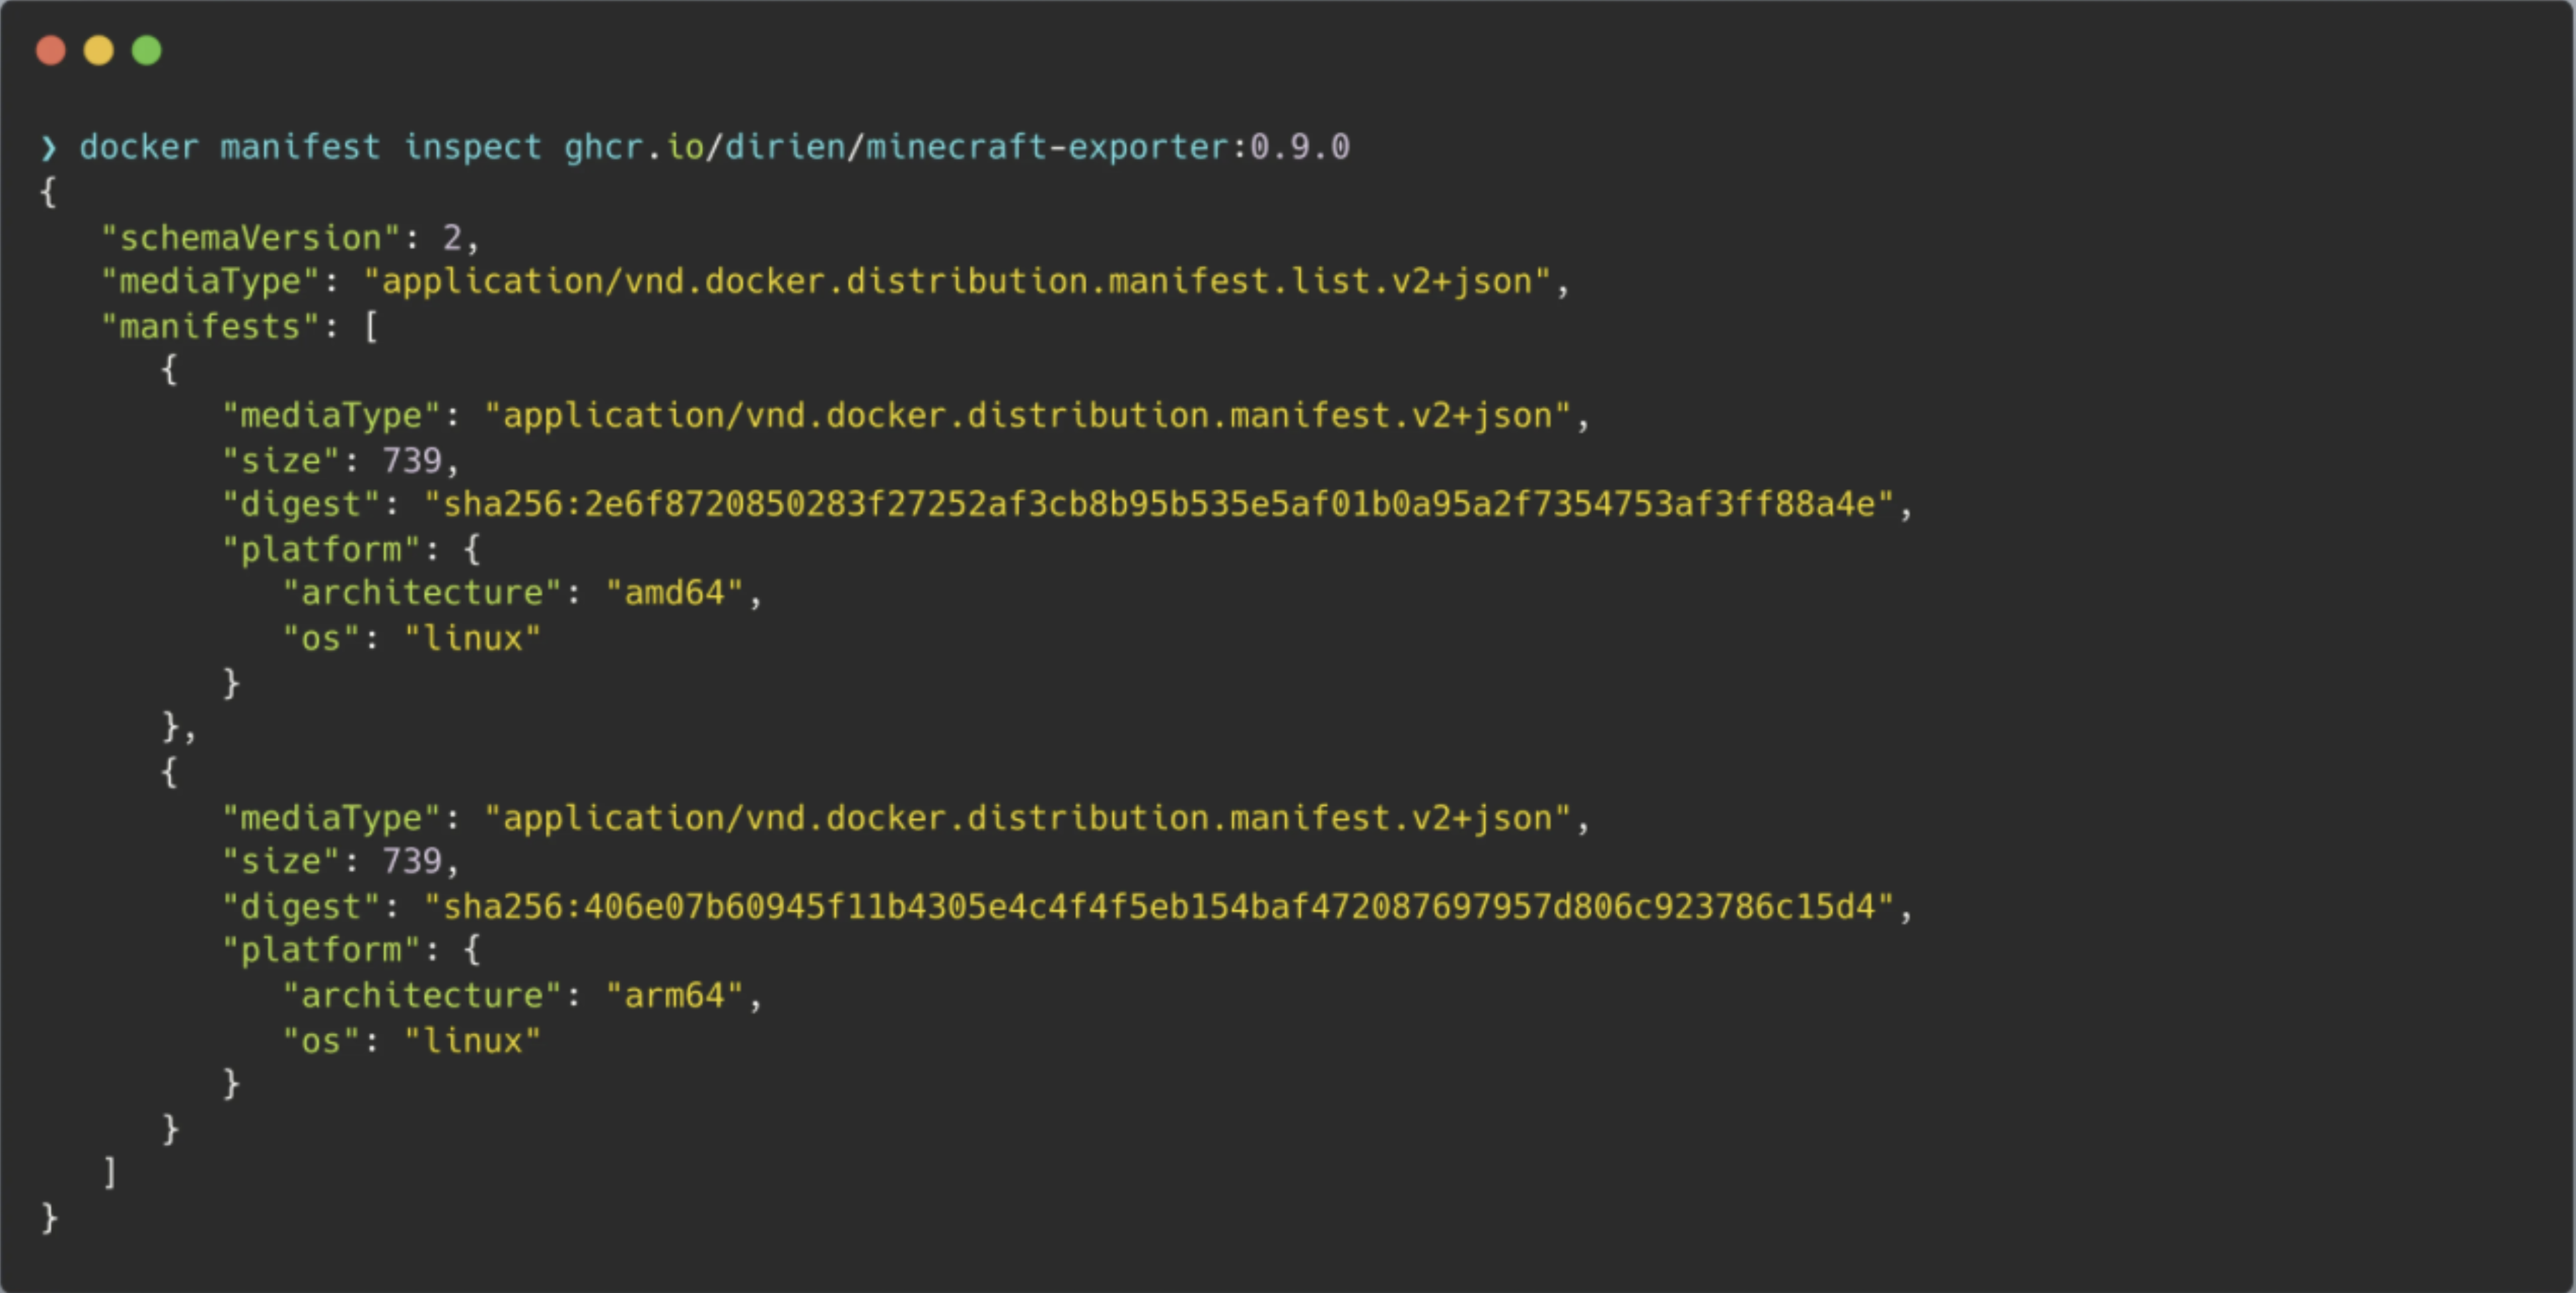 Example output of the docker manifest inspect command